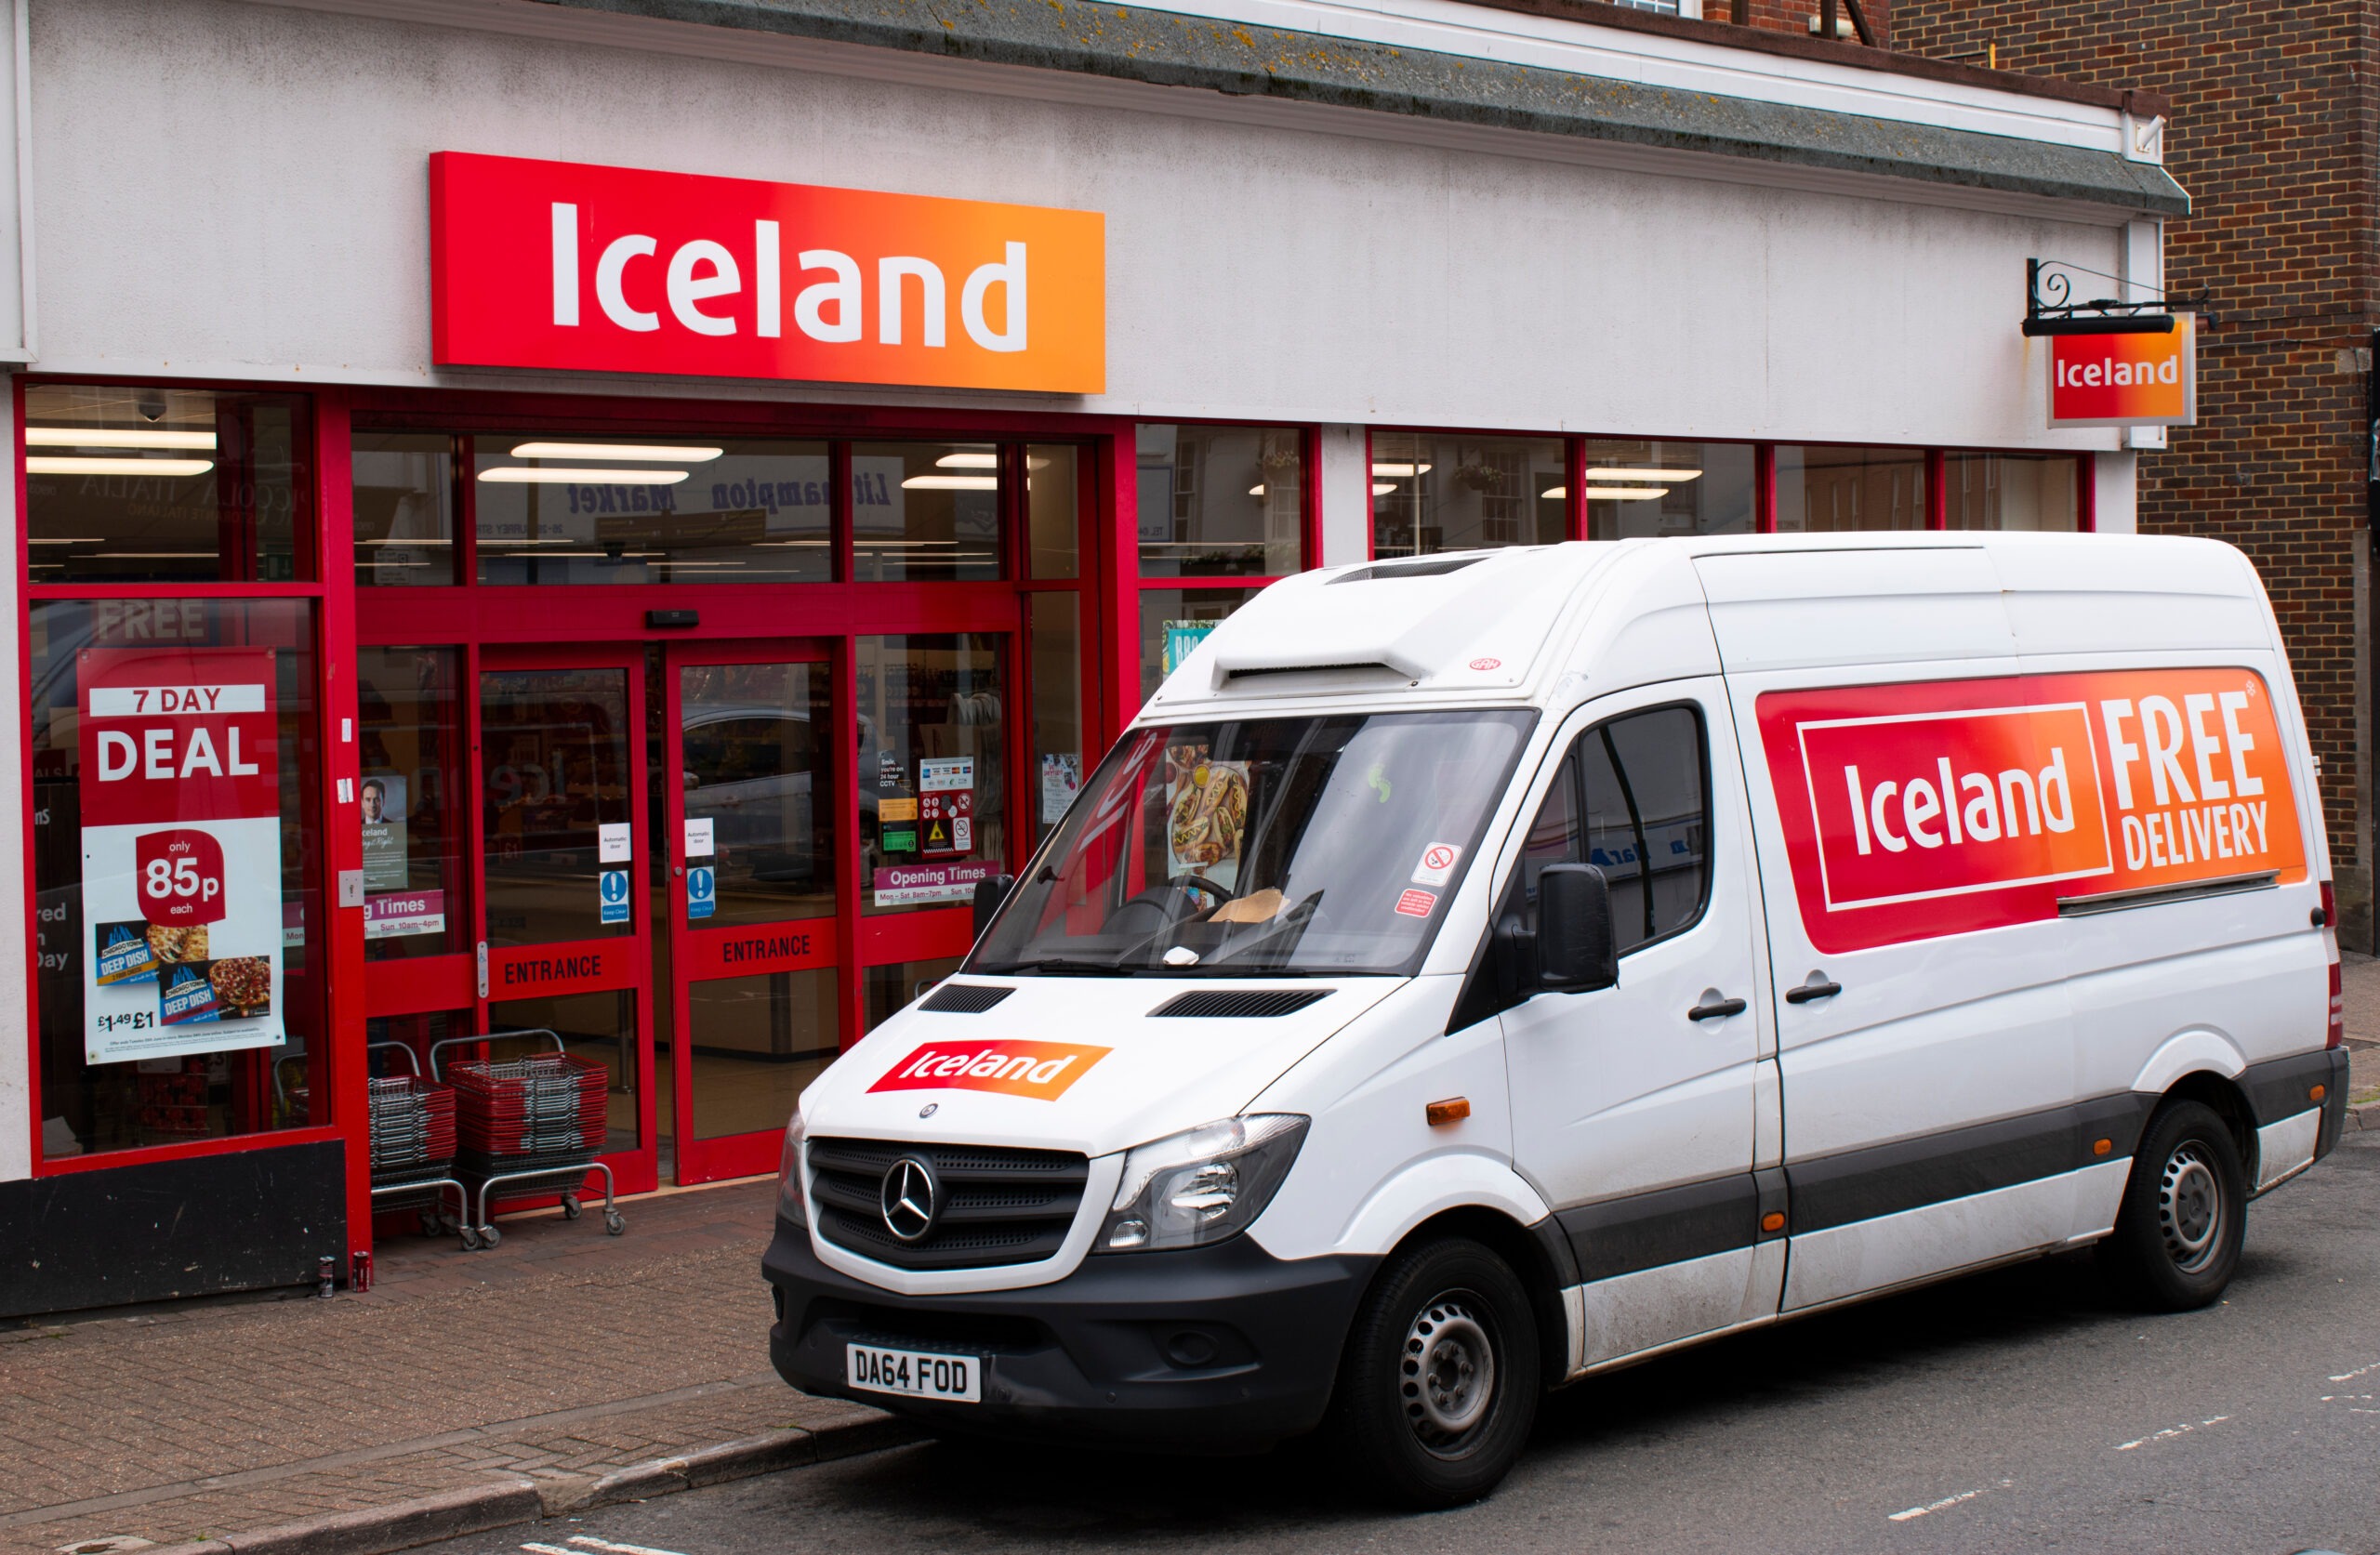 So that’s why Iceland’s gone to the EUIPO!